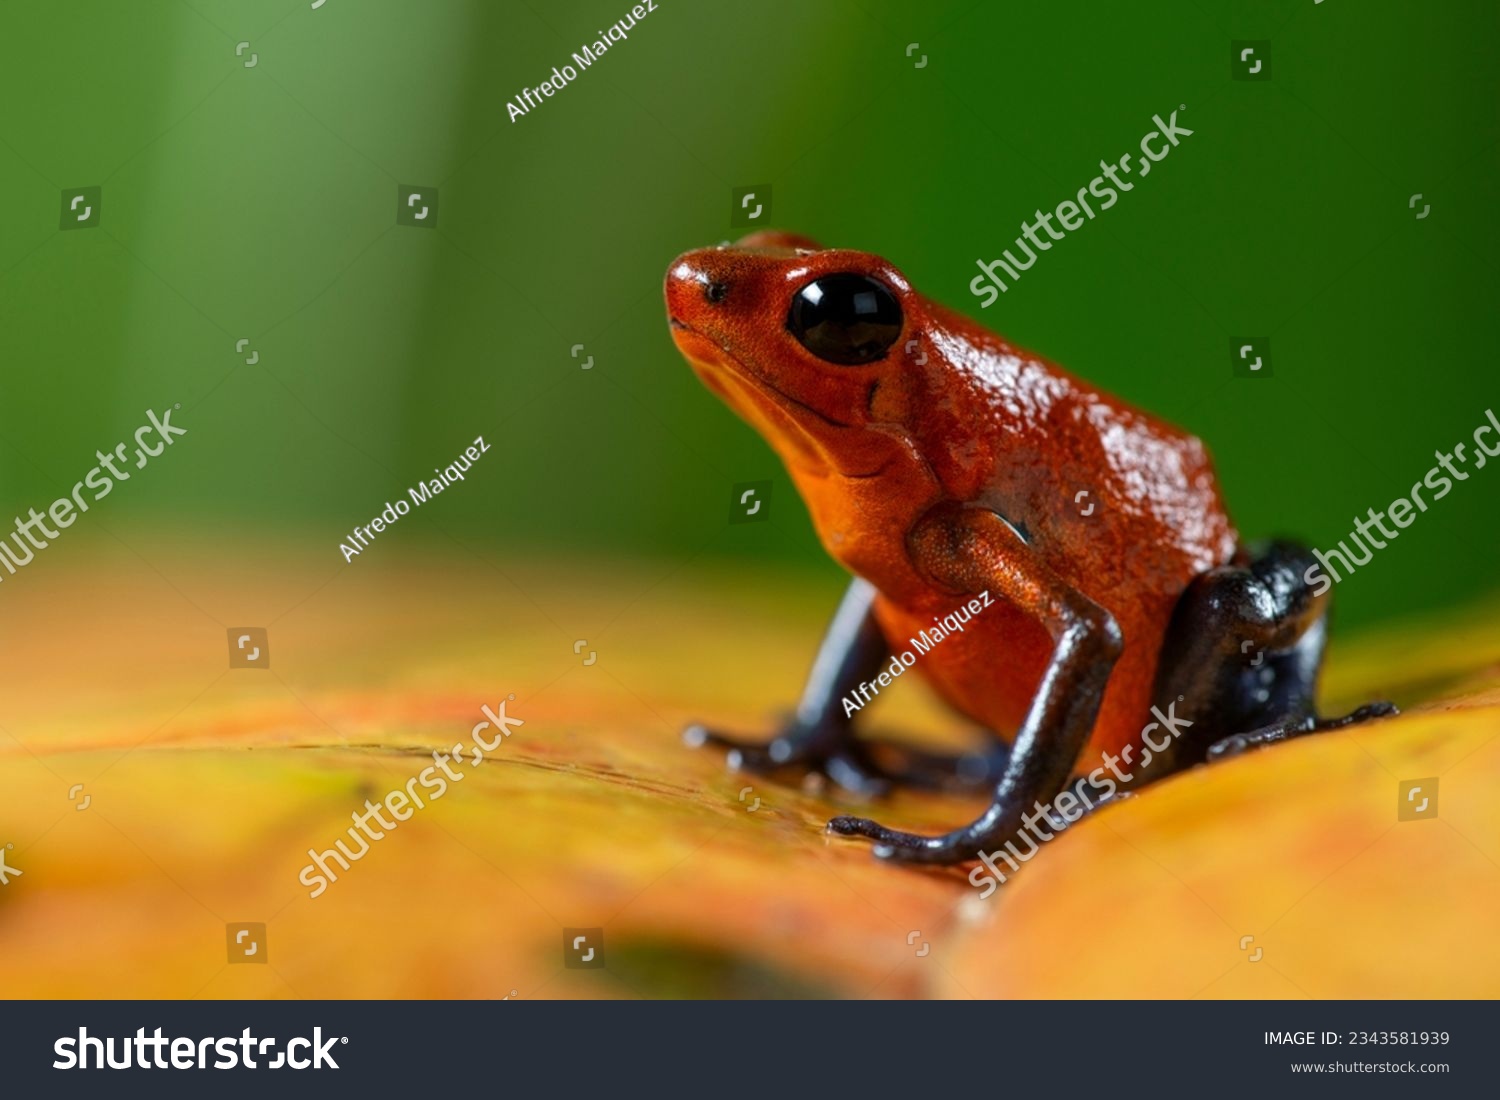  Strawberry Poison-dart Frog (Oophaga pumilio) from the tropical rain forest of Costa Rica, Central America _ stock photo #2343581939